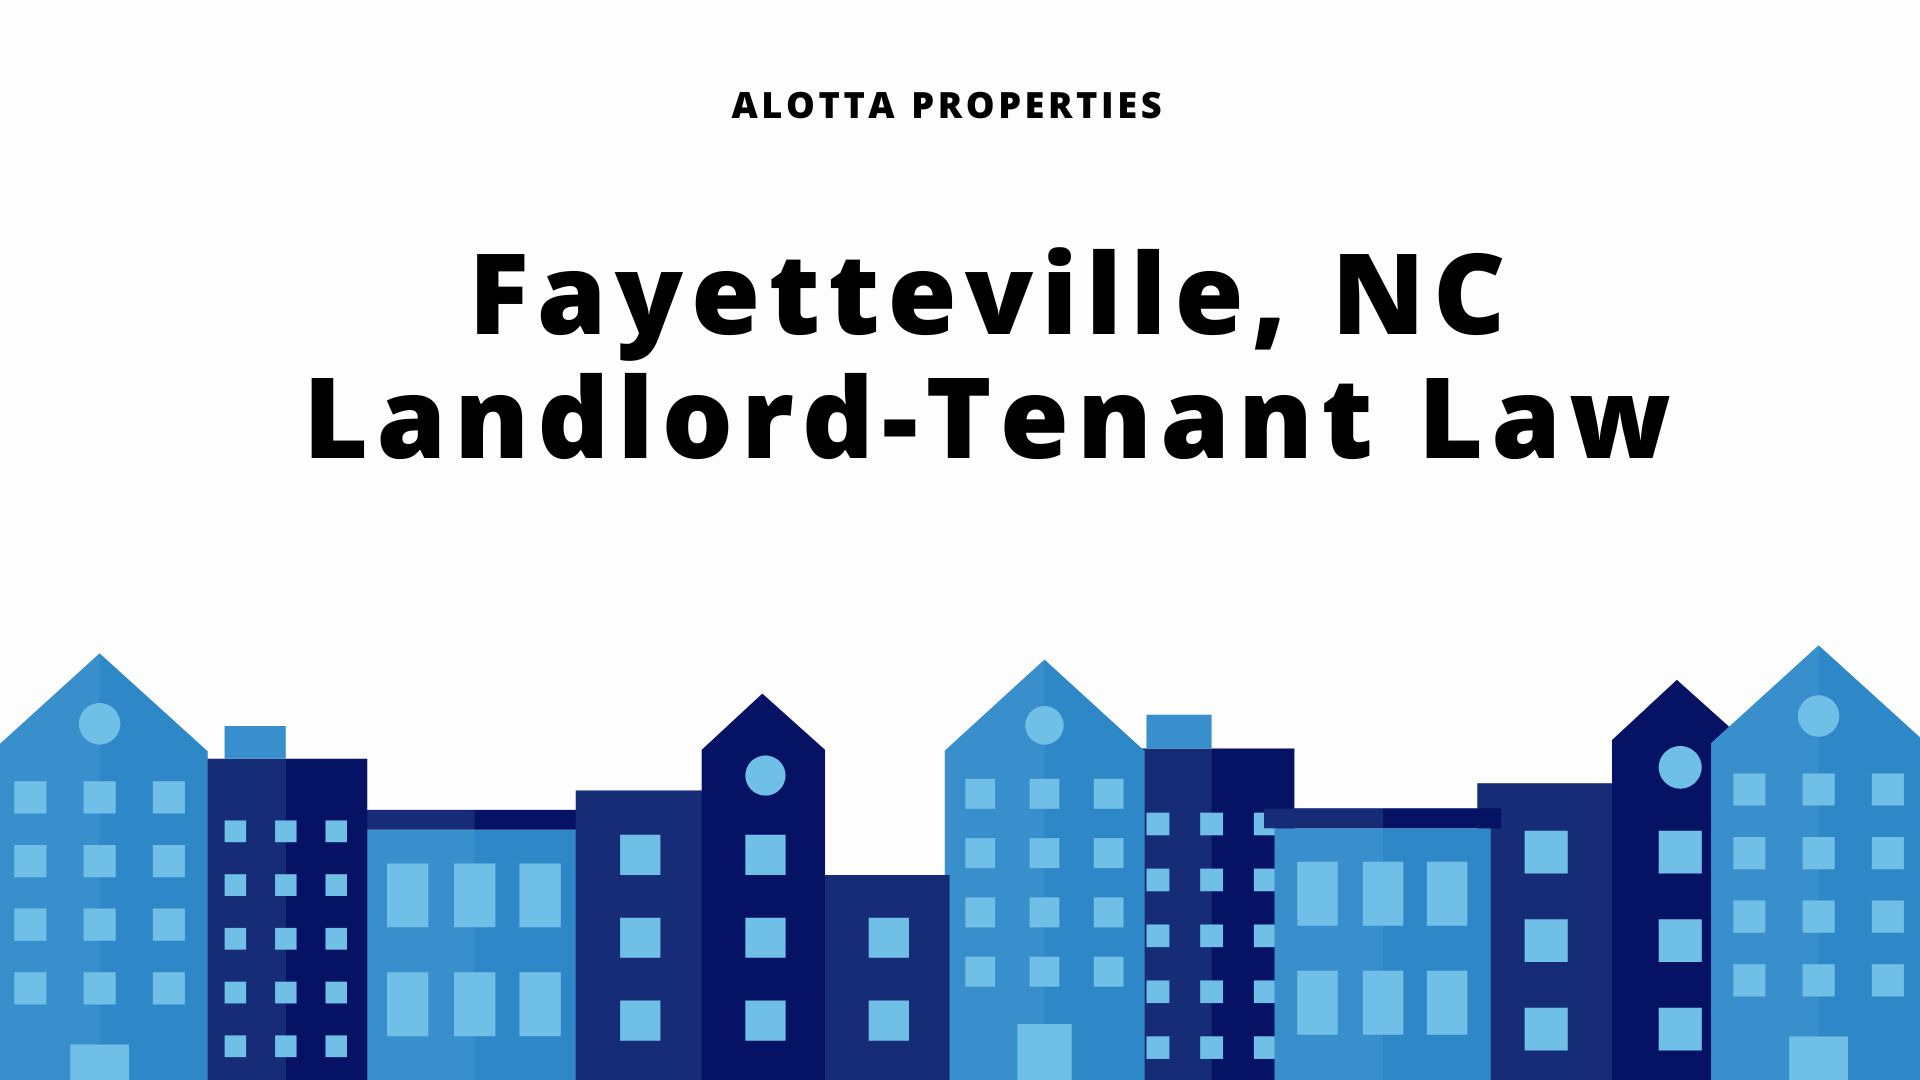 North Carolina Rental Laws - An Overview of Landlord Tenant Rights in Fayetteville